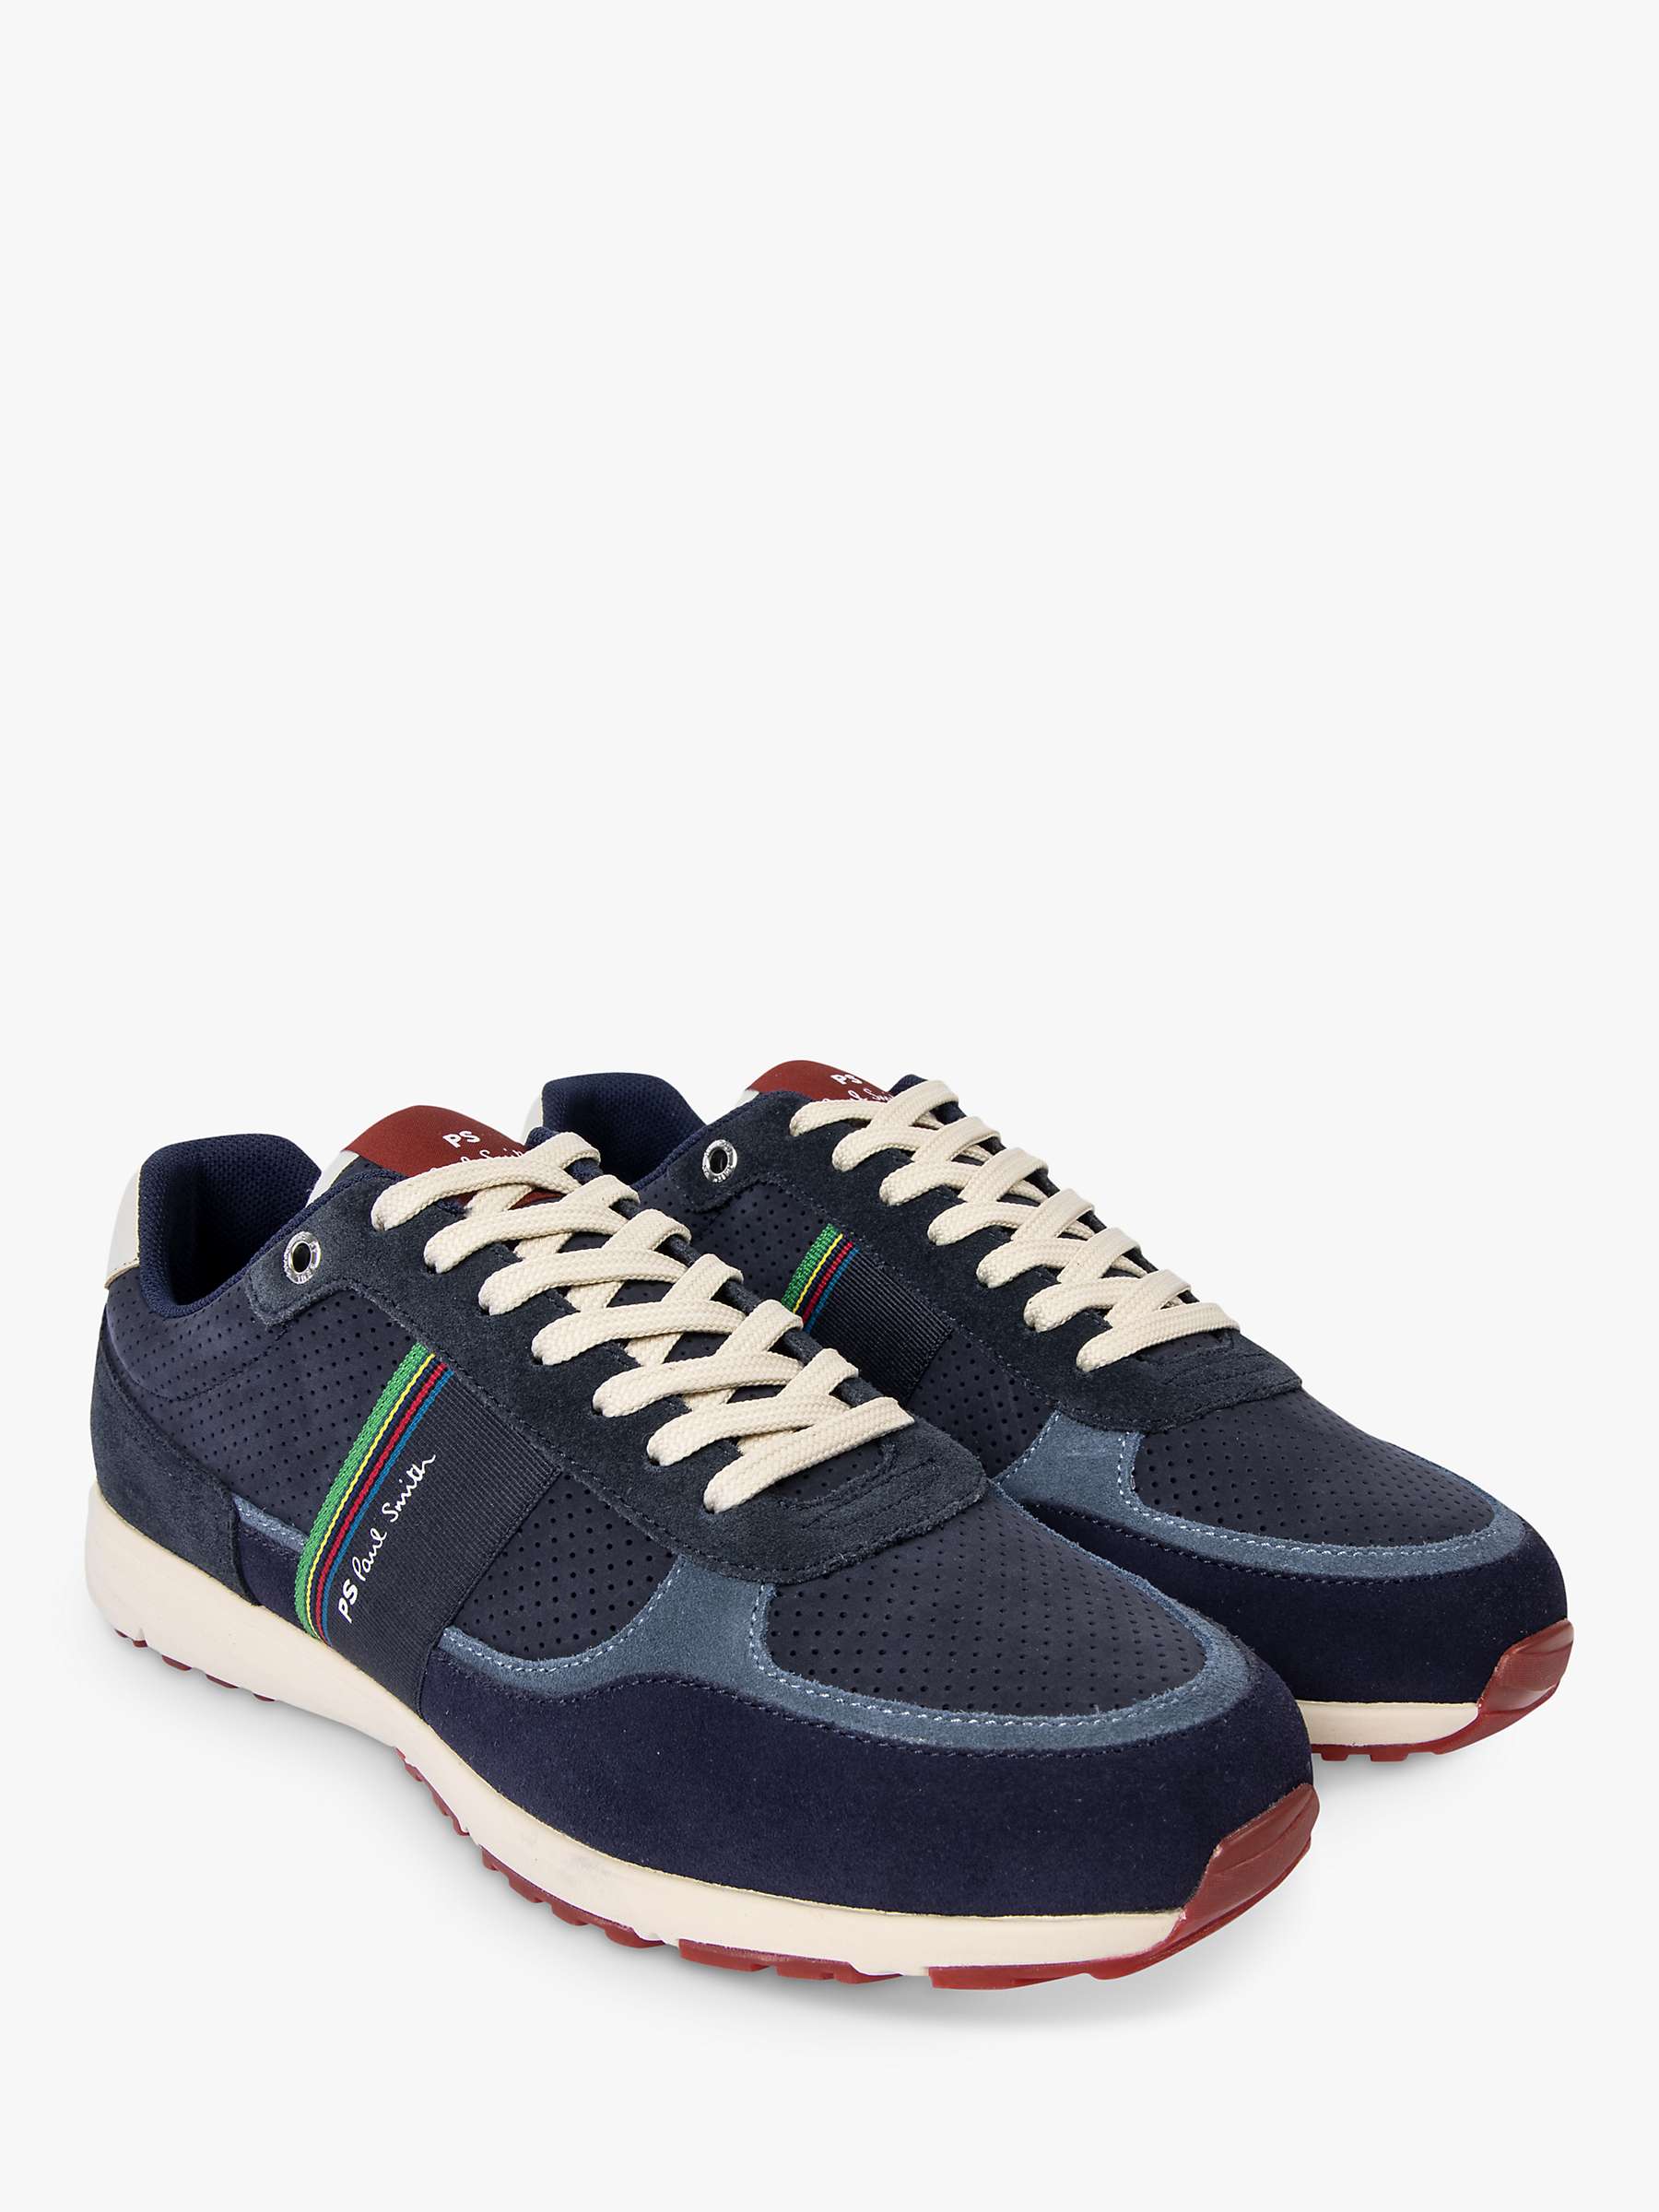 Paul Smith Huey Suede Trainers, Navy at John Lewis & Partners